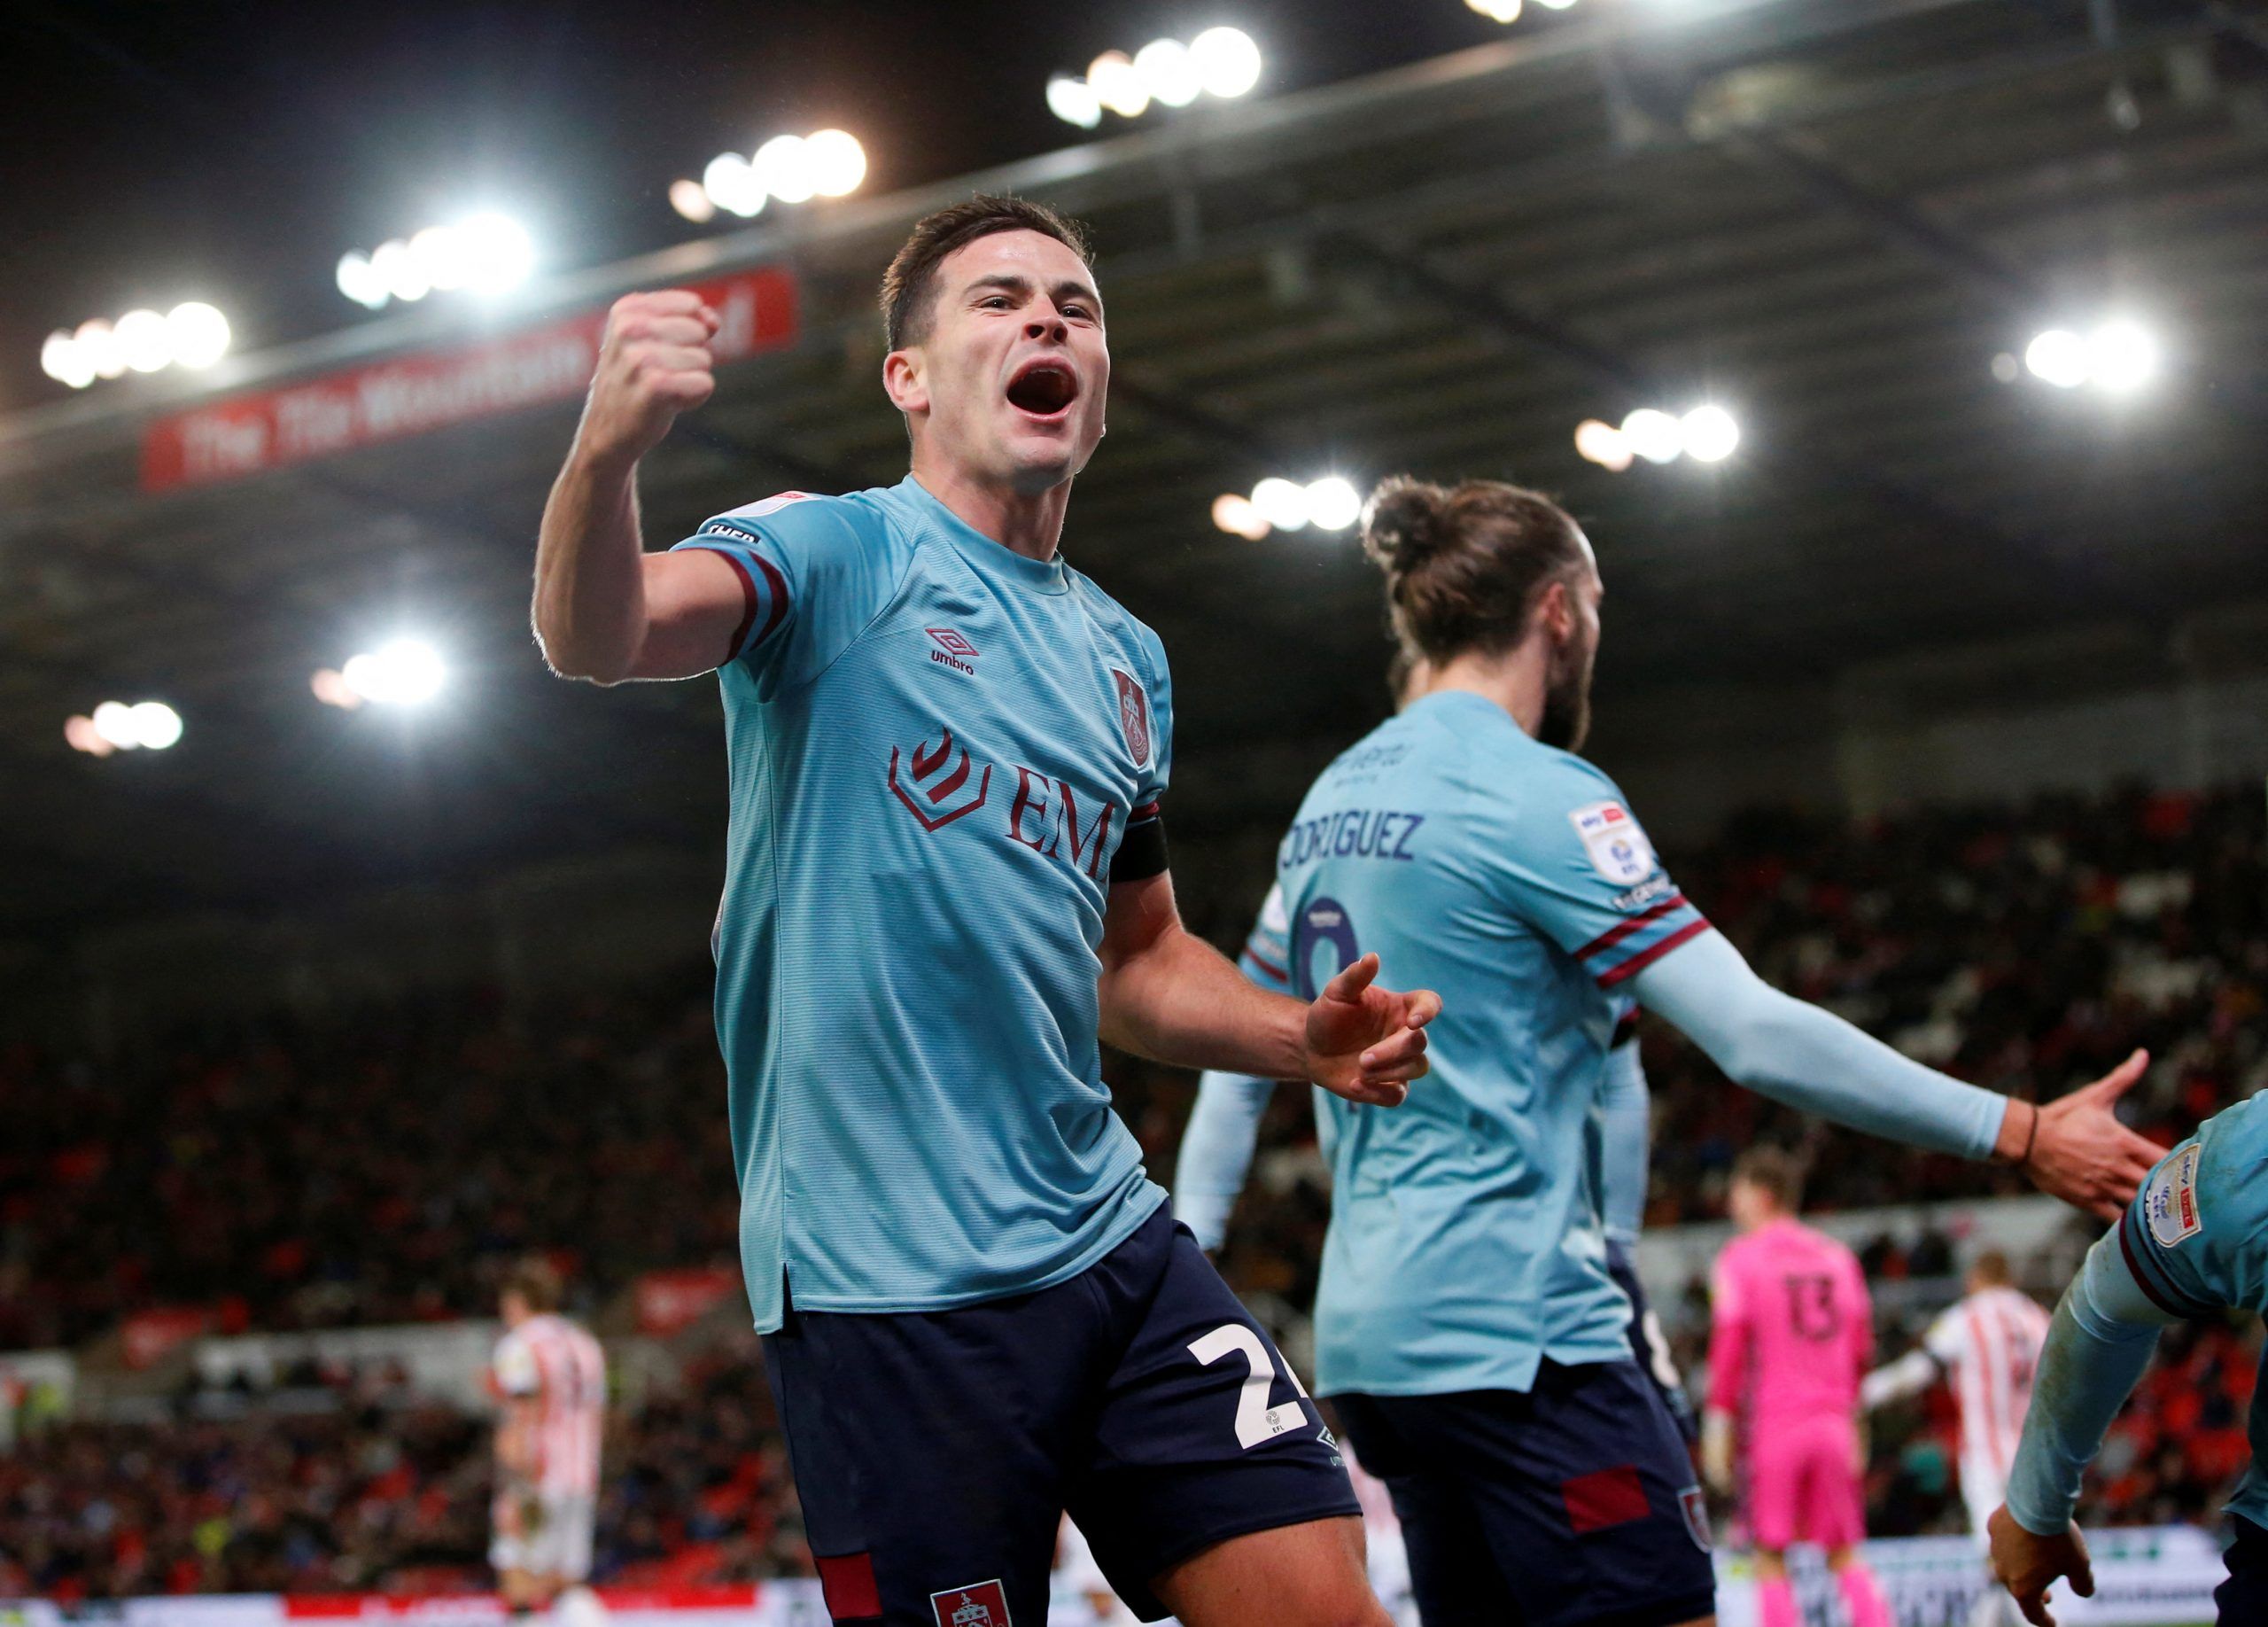 Soccer Football - Championship - Stoke City v Burnley - bet365 Stadium, Stoke-on-Trent, Britain - December 30, 2022  Burnley's Josh Cullen celebrates scoring their first goal    Action Images/Ed Sykes  EDITORIAL USE ONLY. No use with unauthorized audio, video, data, fixture lists, club/league logos or 